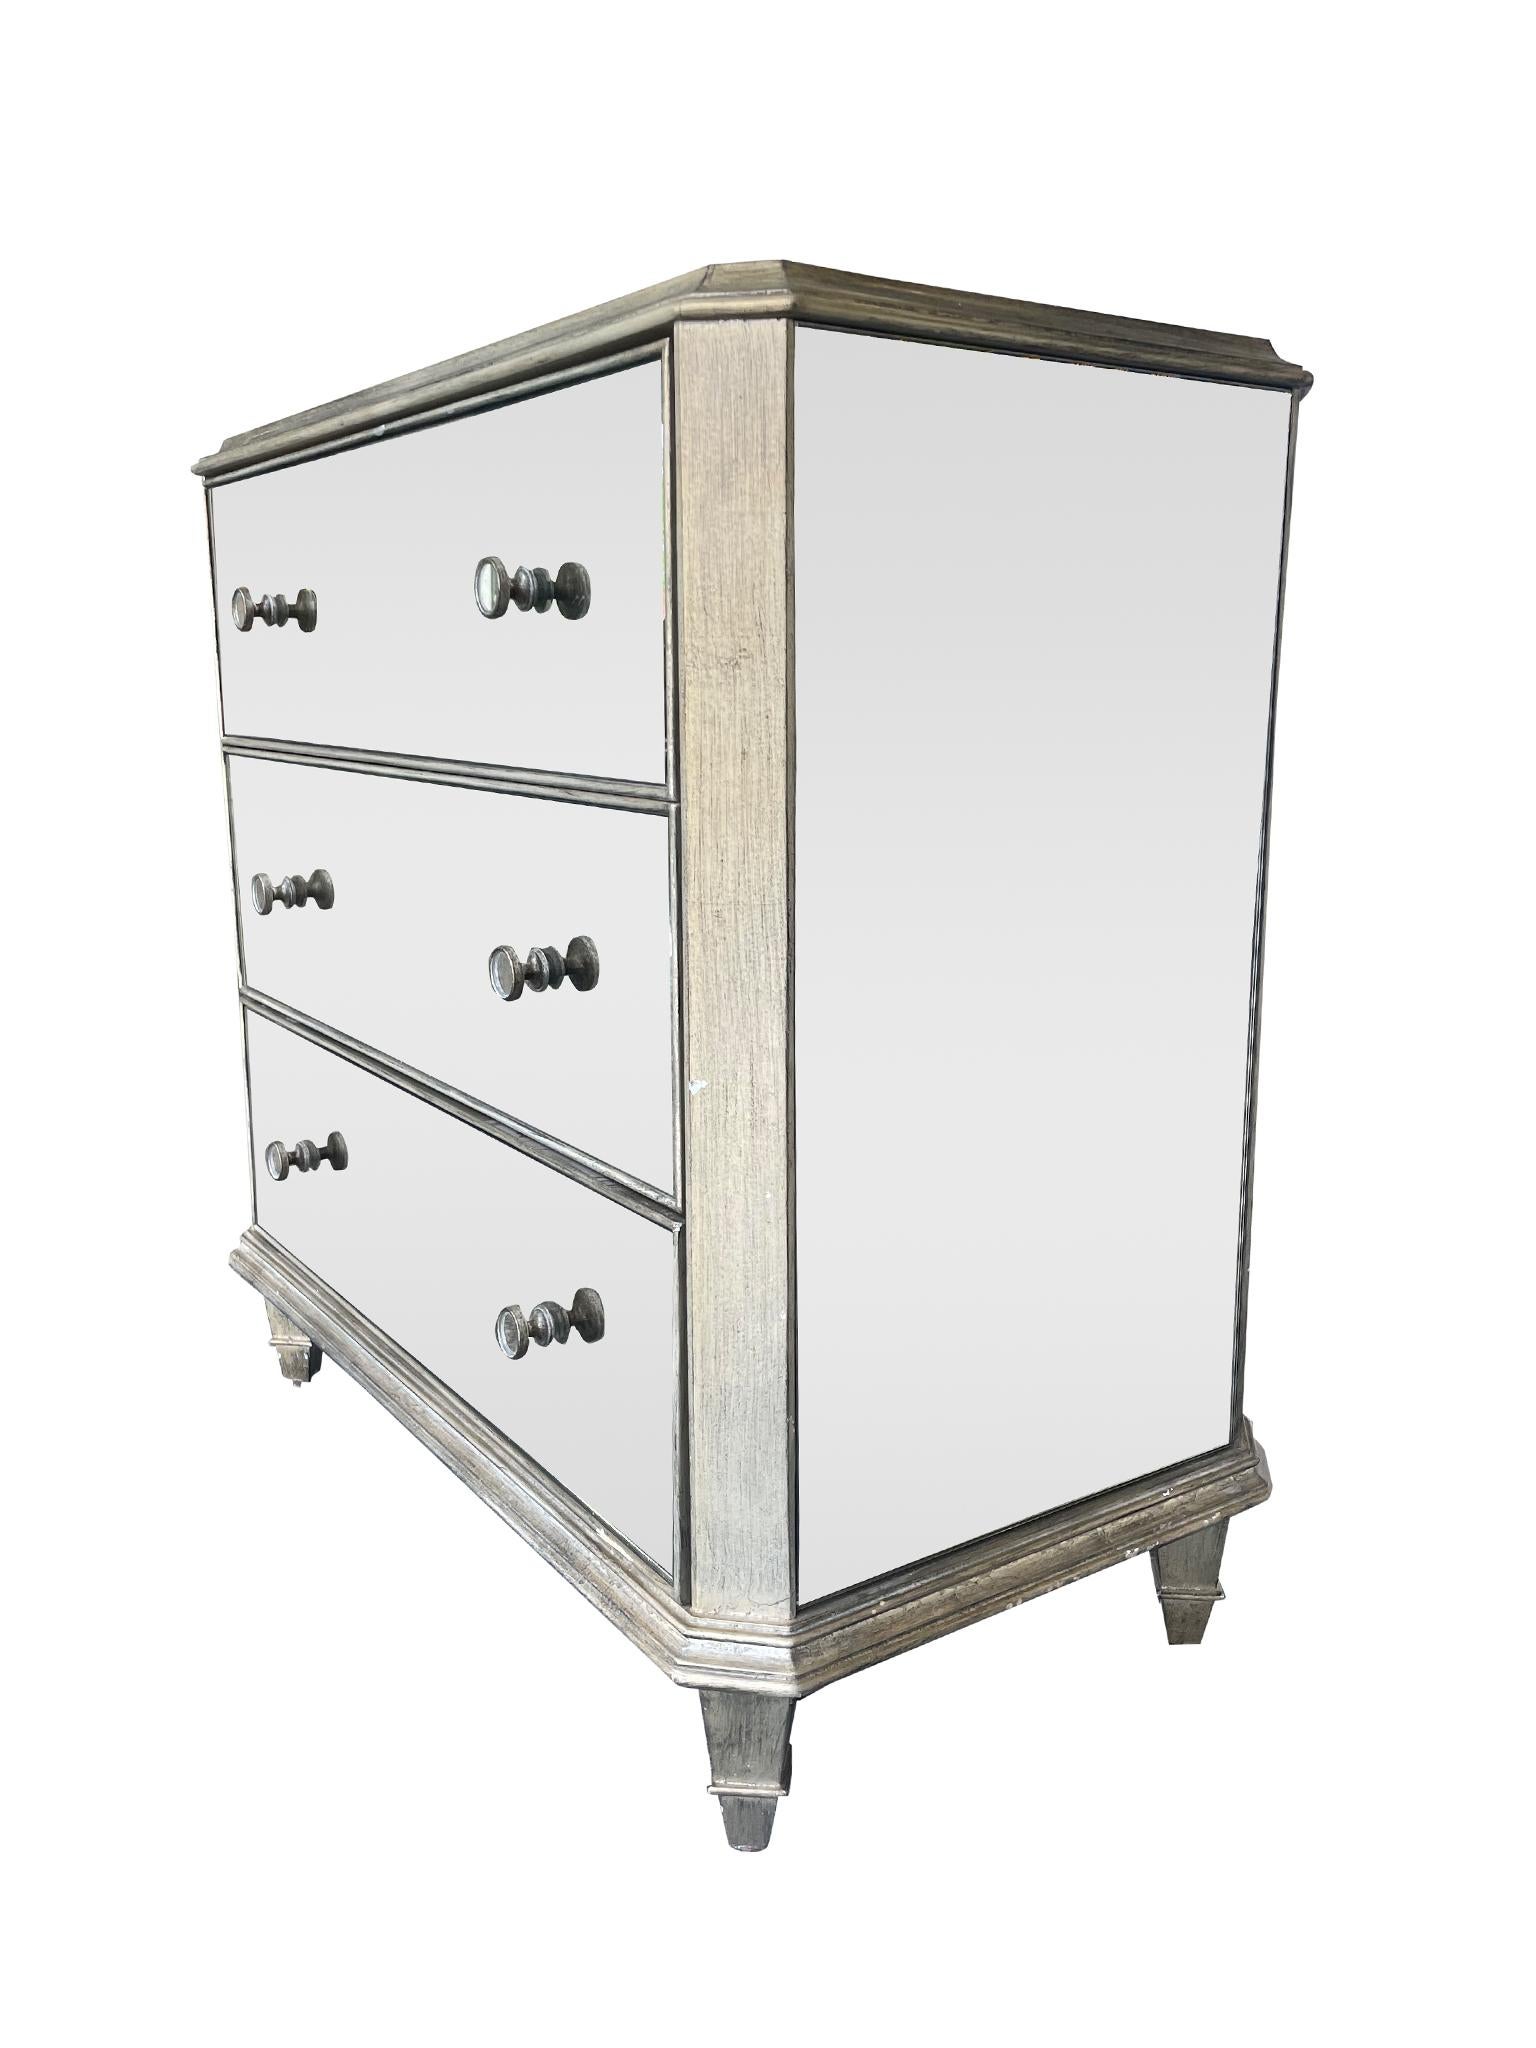 Charming pair of Hollywood Regency style mirrored glass three drawer chests or nightstands. Characterized by their Venetian mirror style panels and silver leaf neoclassical wood base. Designed with low tapered legs, three functional drawers, and